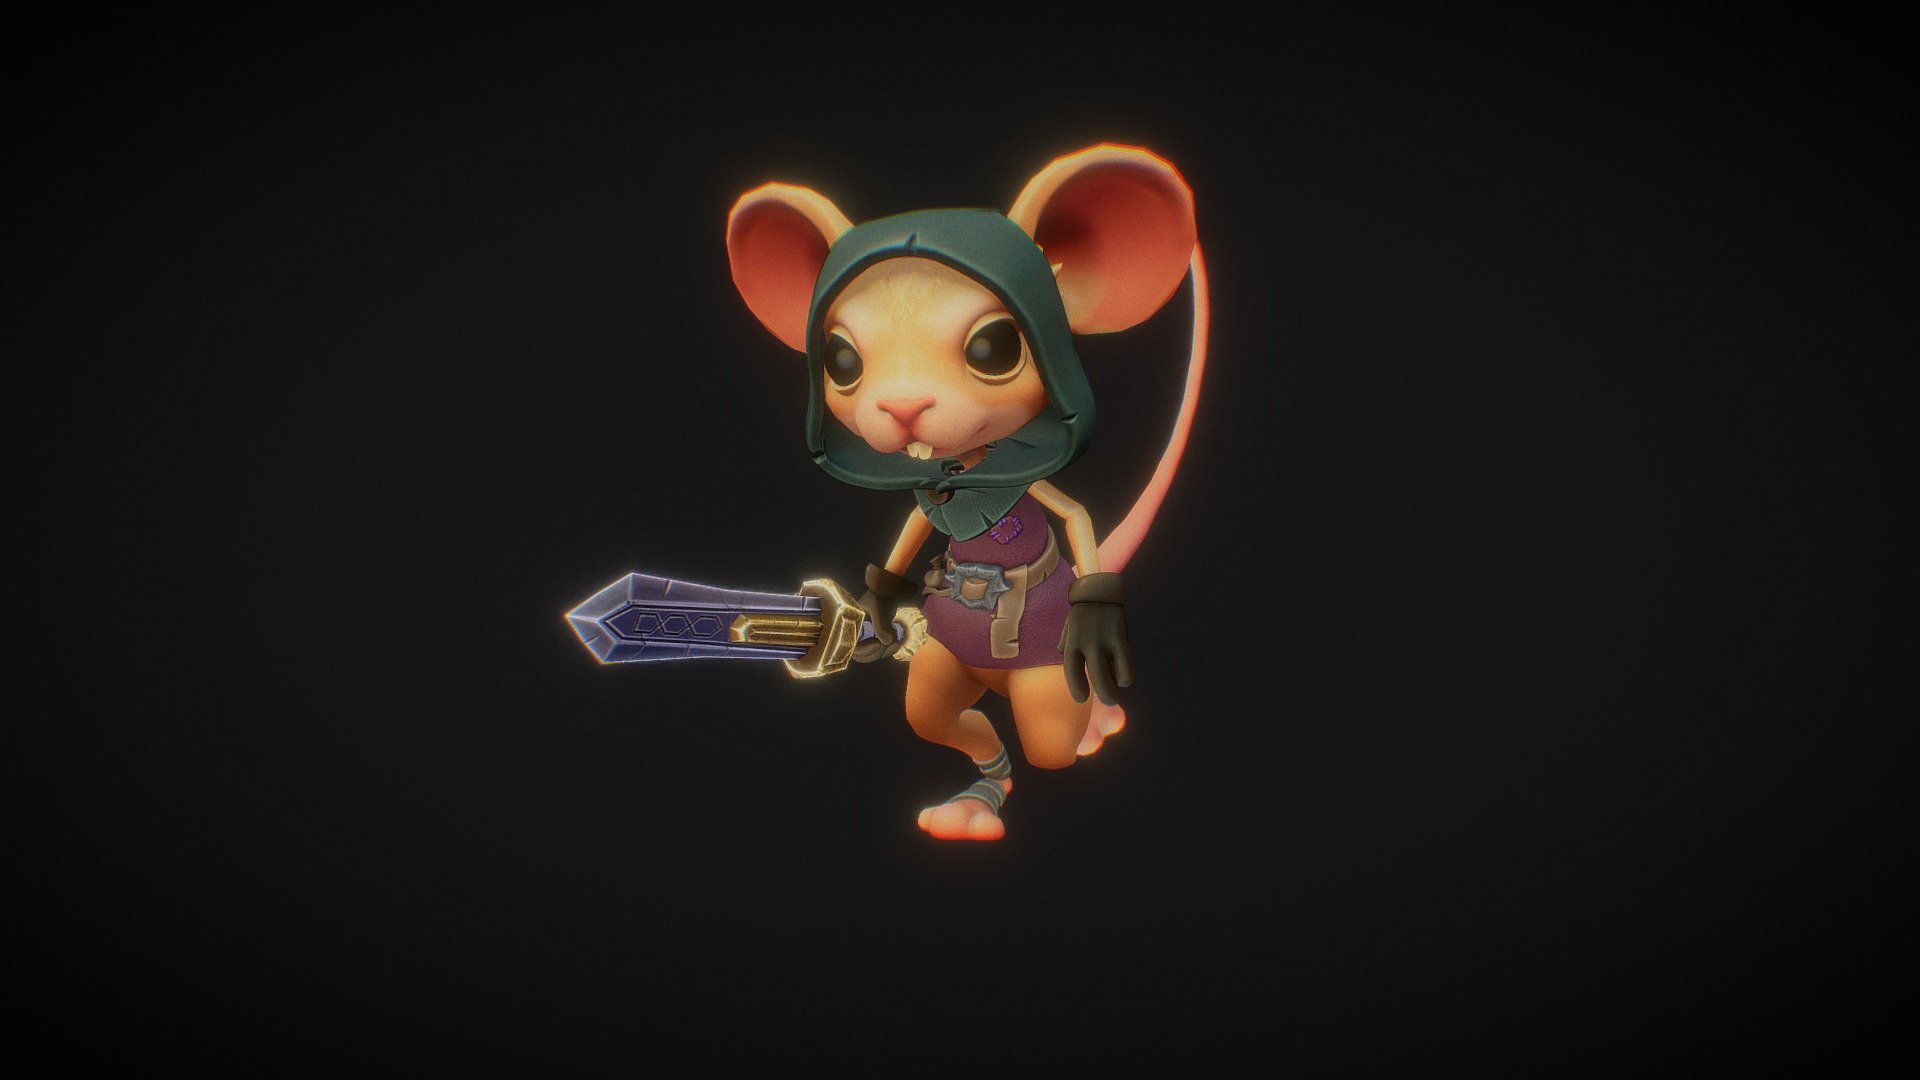 Mouse Knight İs Game Ready Character Model About the practice - Mouse Knight - 3D model by aciklar.sedat 3d model